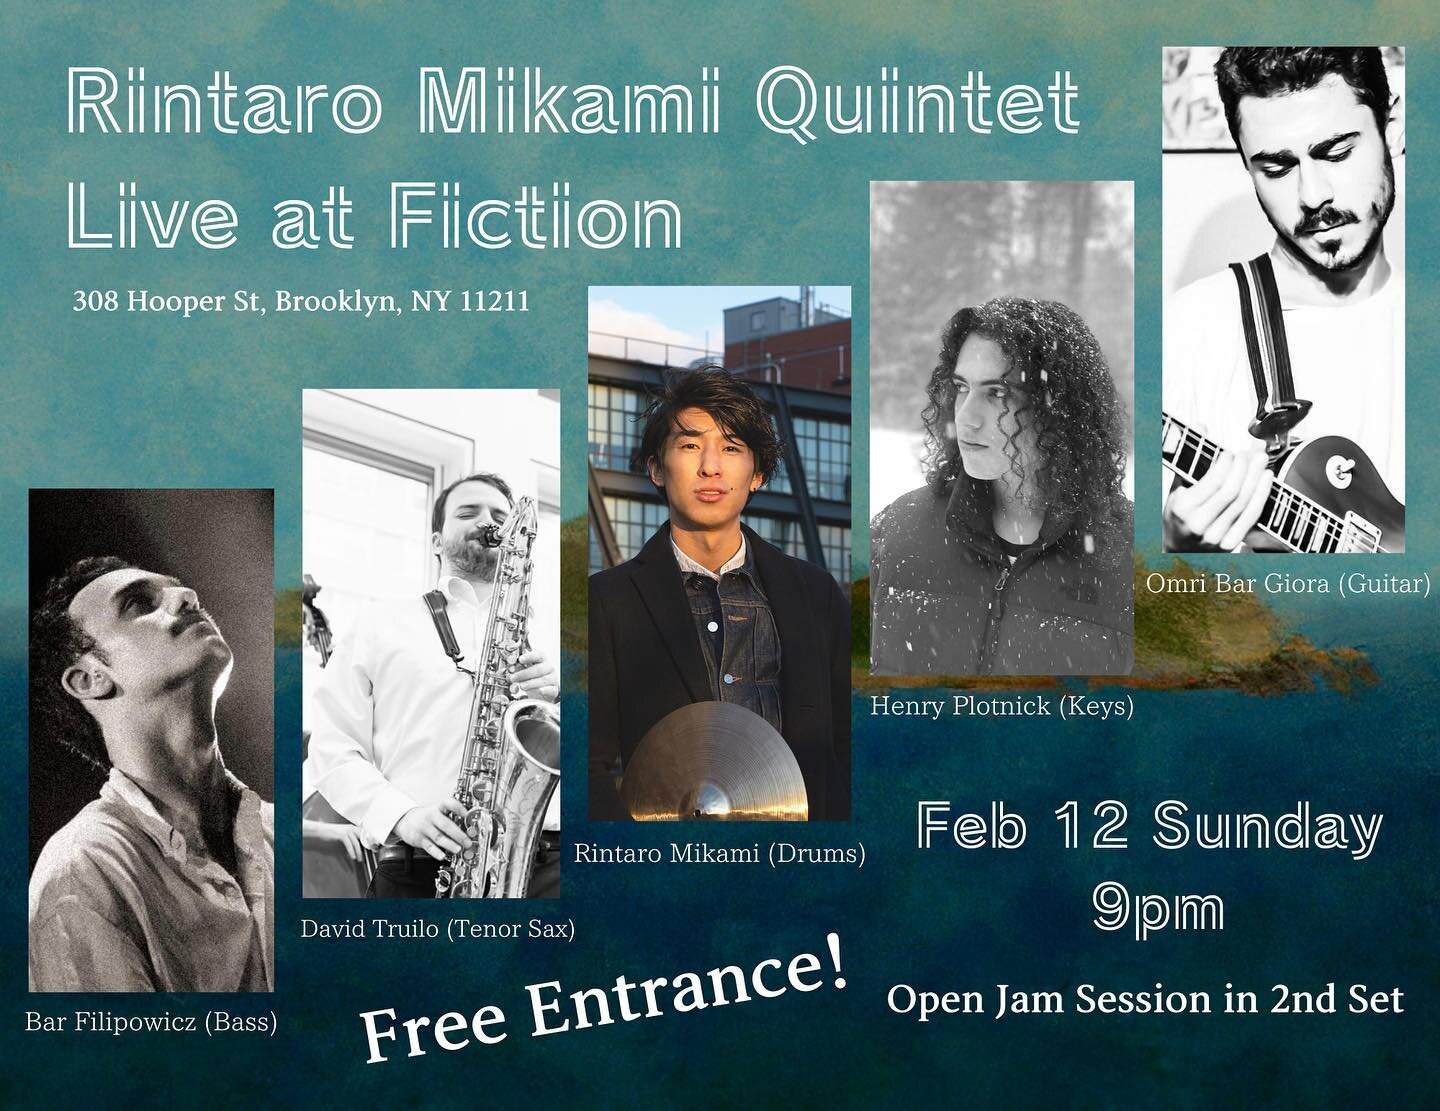 Next Sunday Feb 12 at Fiction Brooklyn!
So excited to present my original music with my quintet! 
We'll record my album a week after this show!

And 2nd set will be a jam session!! So bring your instruments!!

Hope to see you there!!